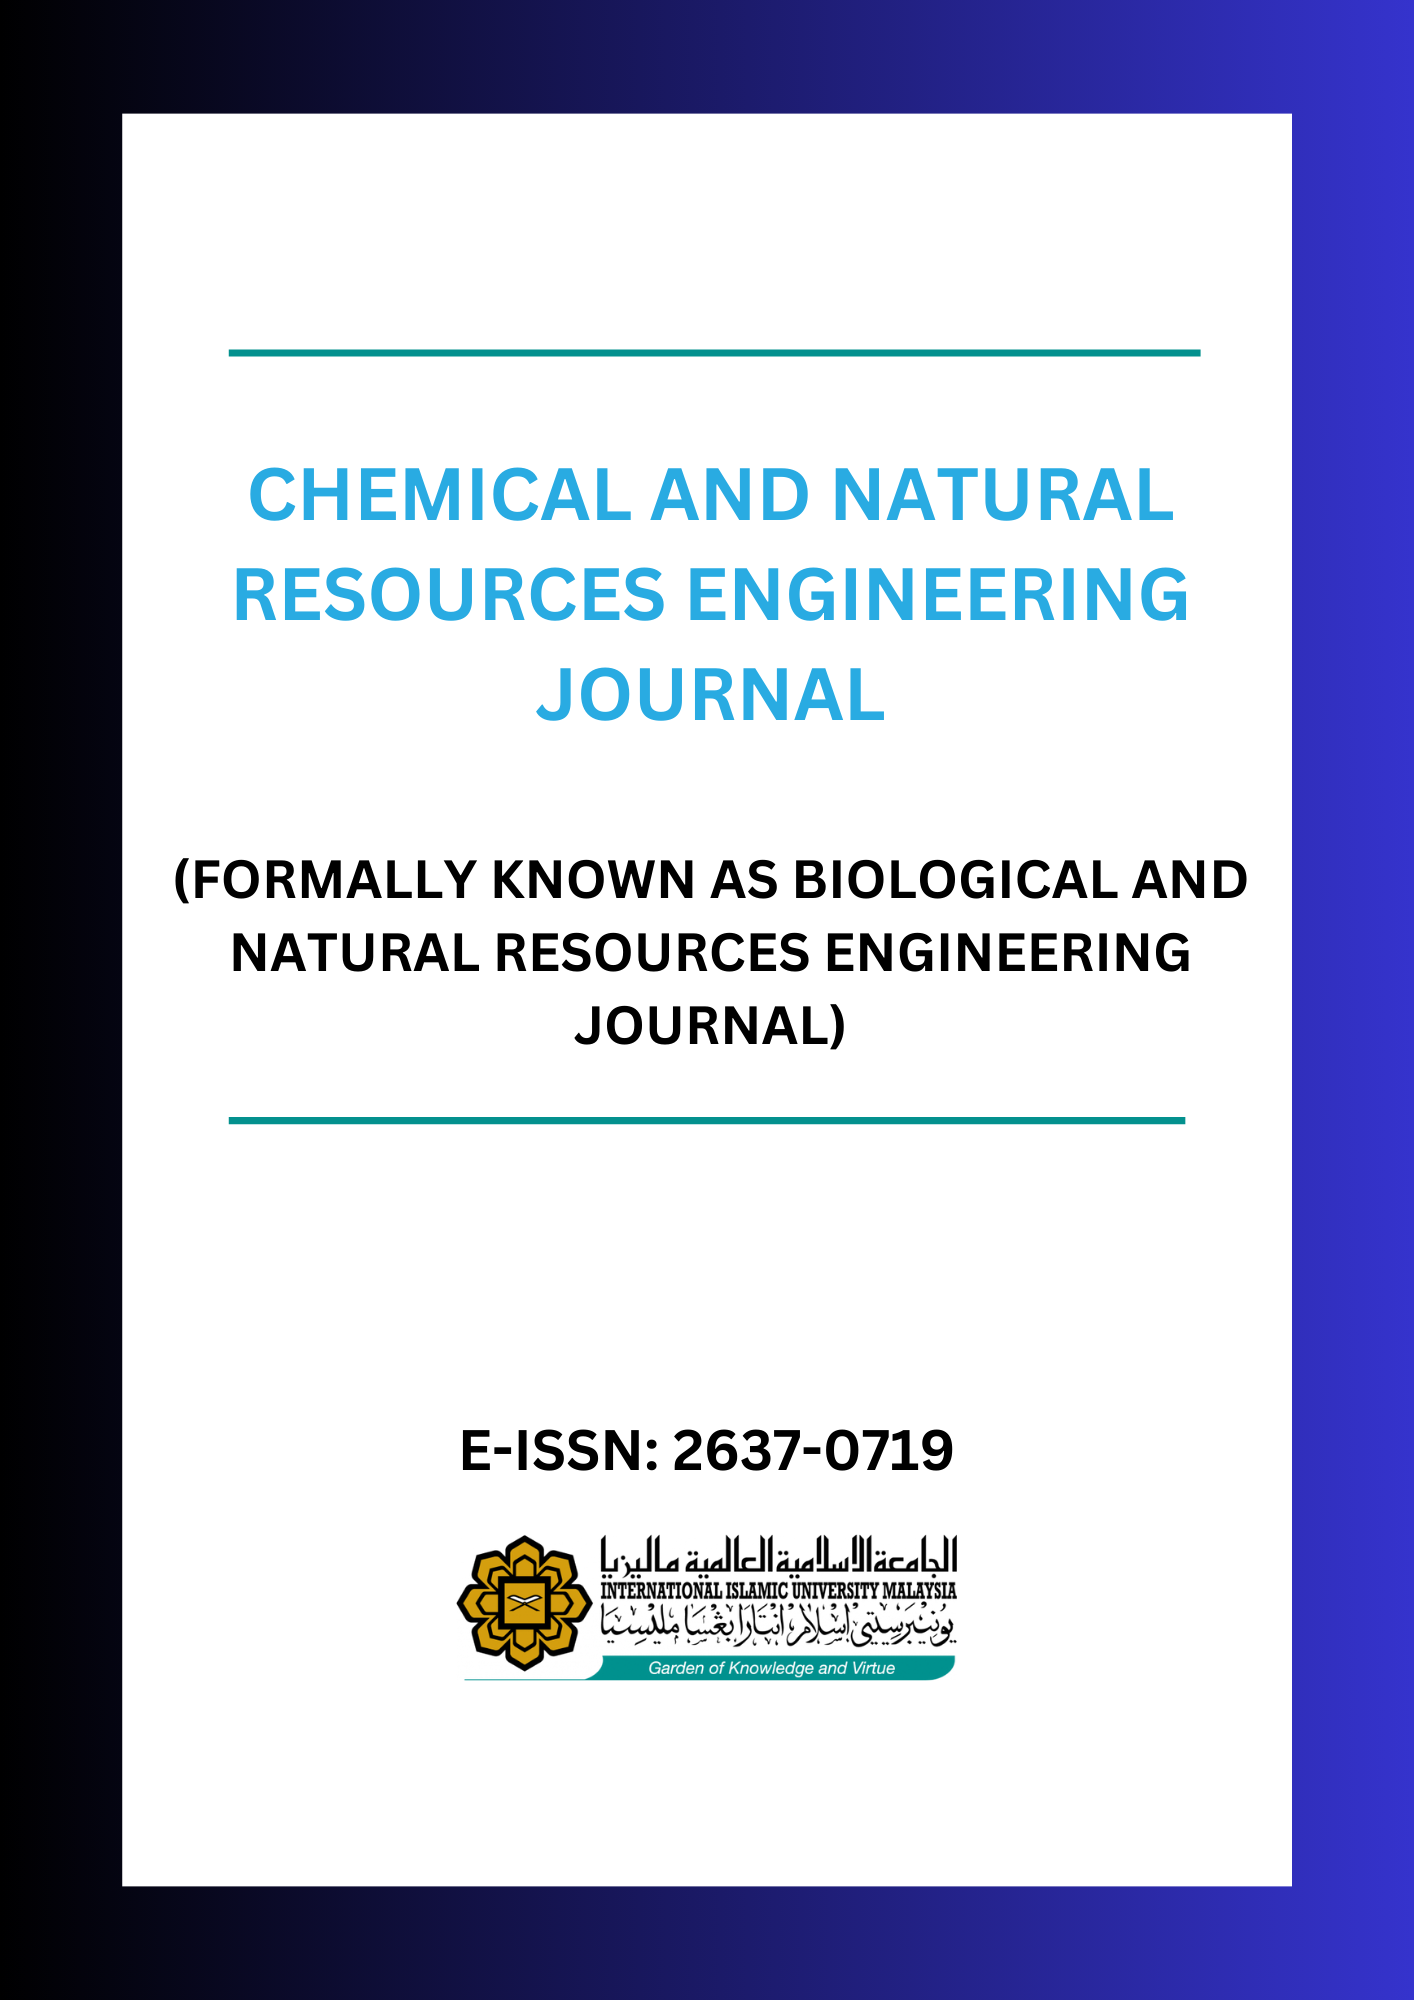 					View Vol. 7 No. 1 (2023): VOL 7 NO 1 (2023):  CHEMICAL AND NATURAL RESOURCES ENGINEERING JOURNAL  (FORMALLY KNOWN AS BIOLOGICAL AND NATURAL RESOURCES ENGINEERING JOURNAL)
				